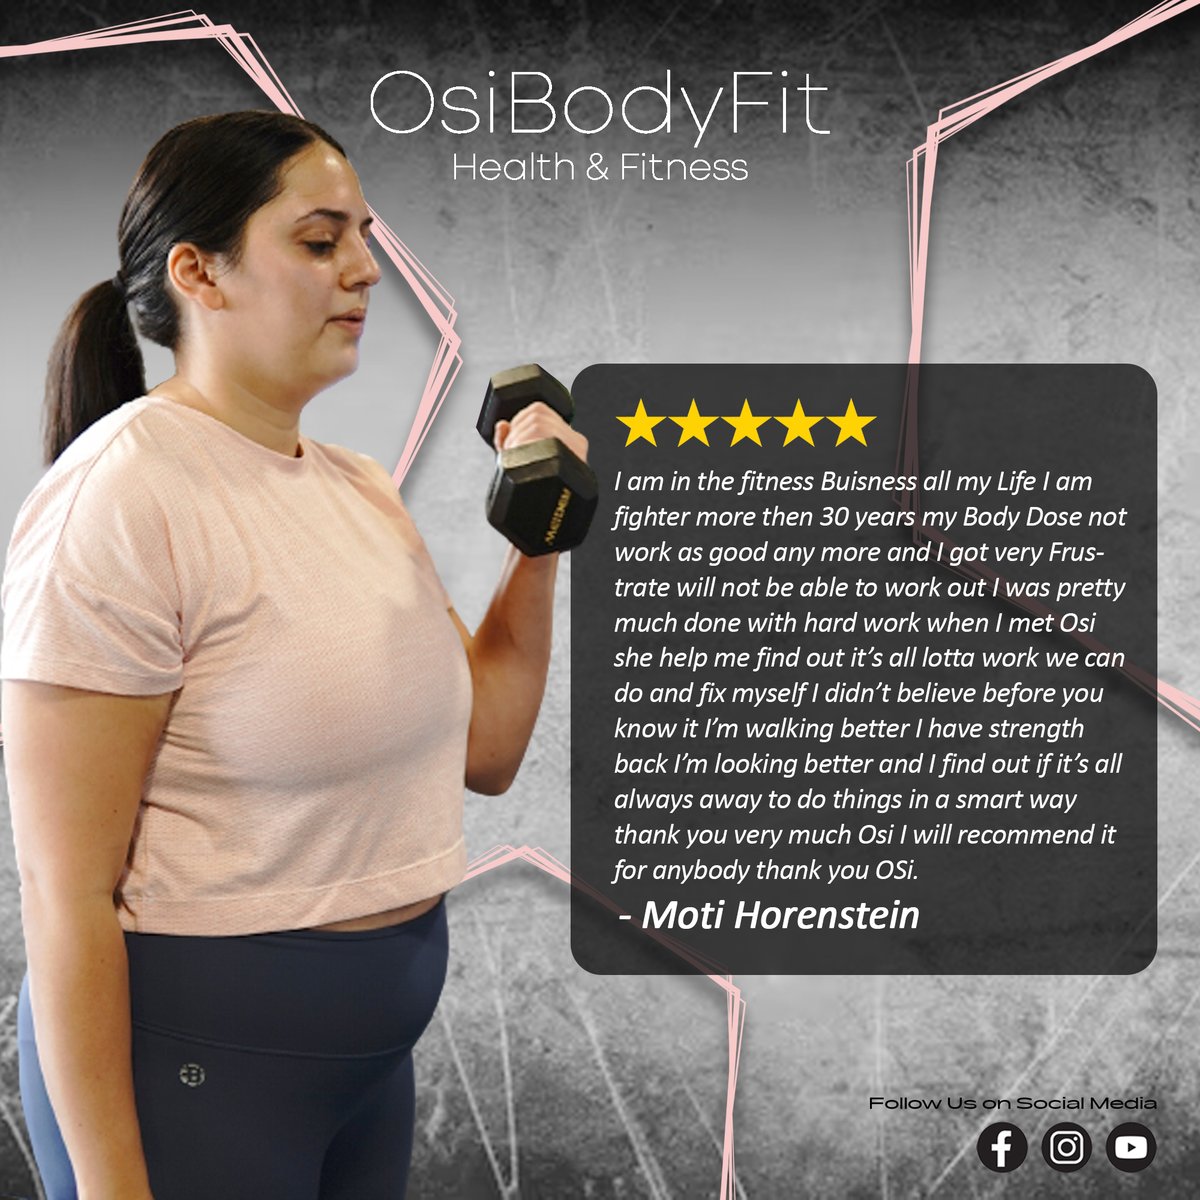 Osi Body Fit is where fitness dreams become a reality. Our clients have achieved incredible results with enjoyment at the core of their journey. Let's make your fitness dreams come true too! 🌟🏋️‍♀️ #FitnessDreams